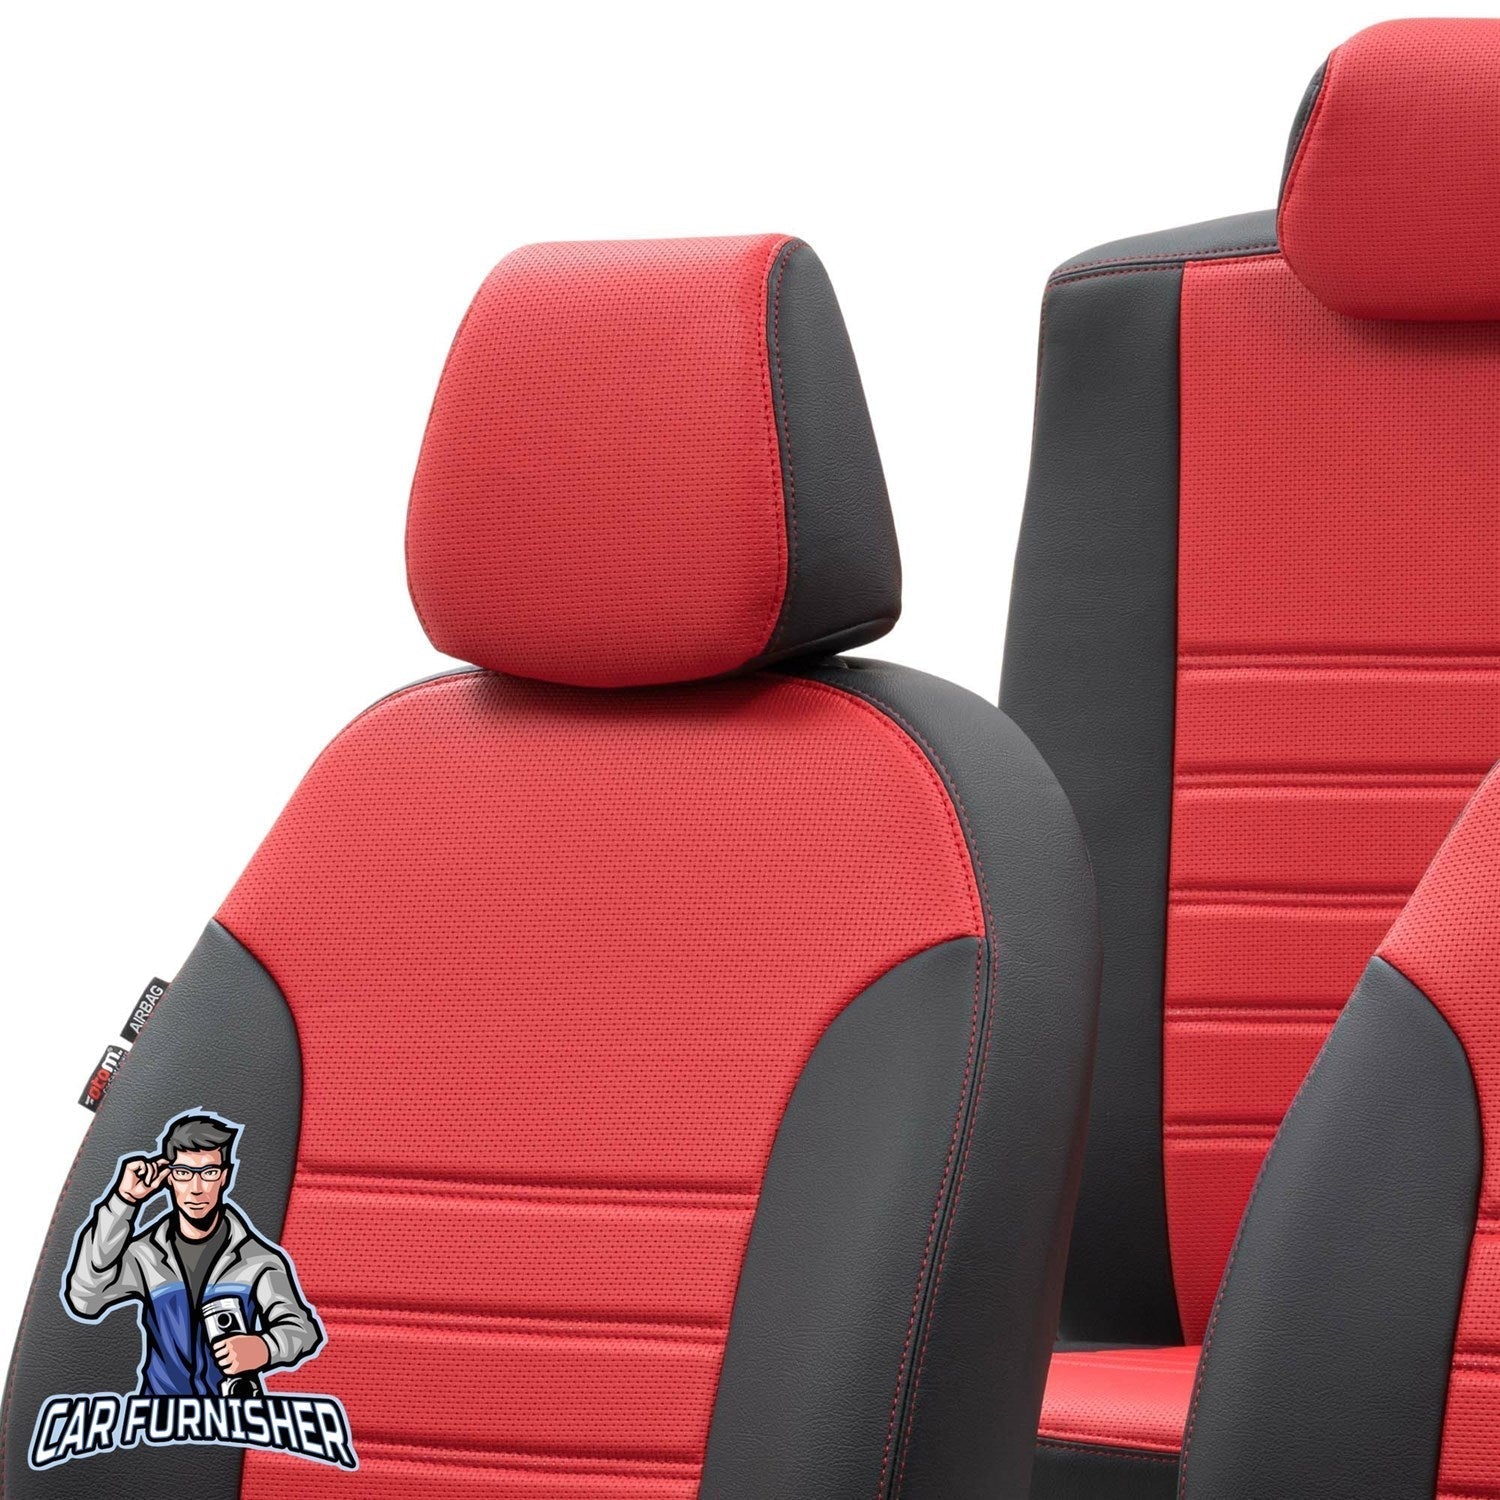 Ford F-Max Seat Cover New York Leather Design Red Front Seats (2 Seats + Handrest + Headrests) Leather